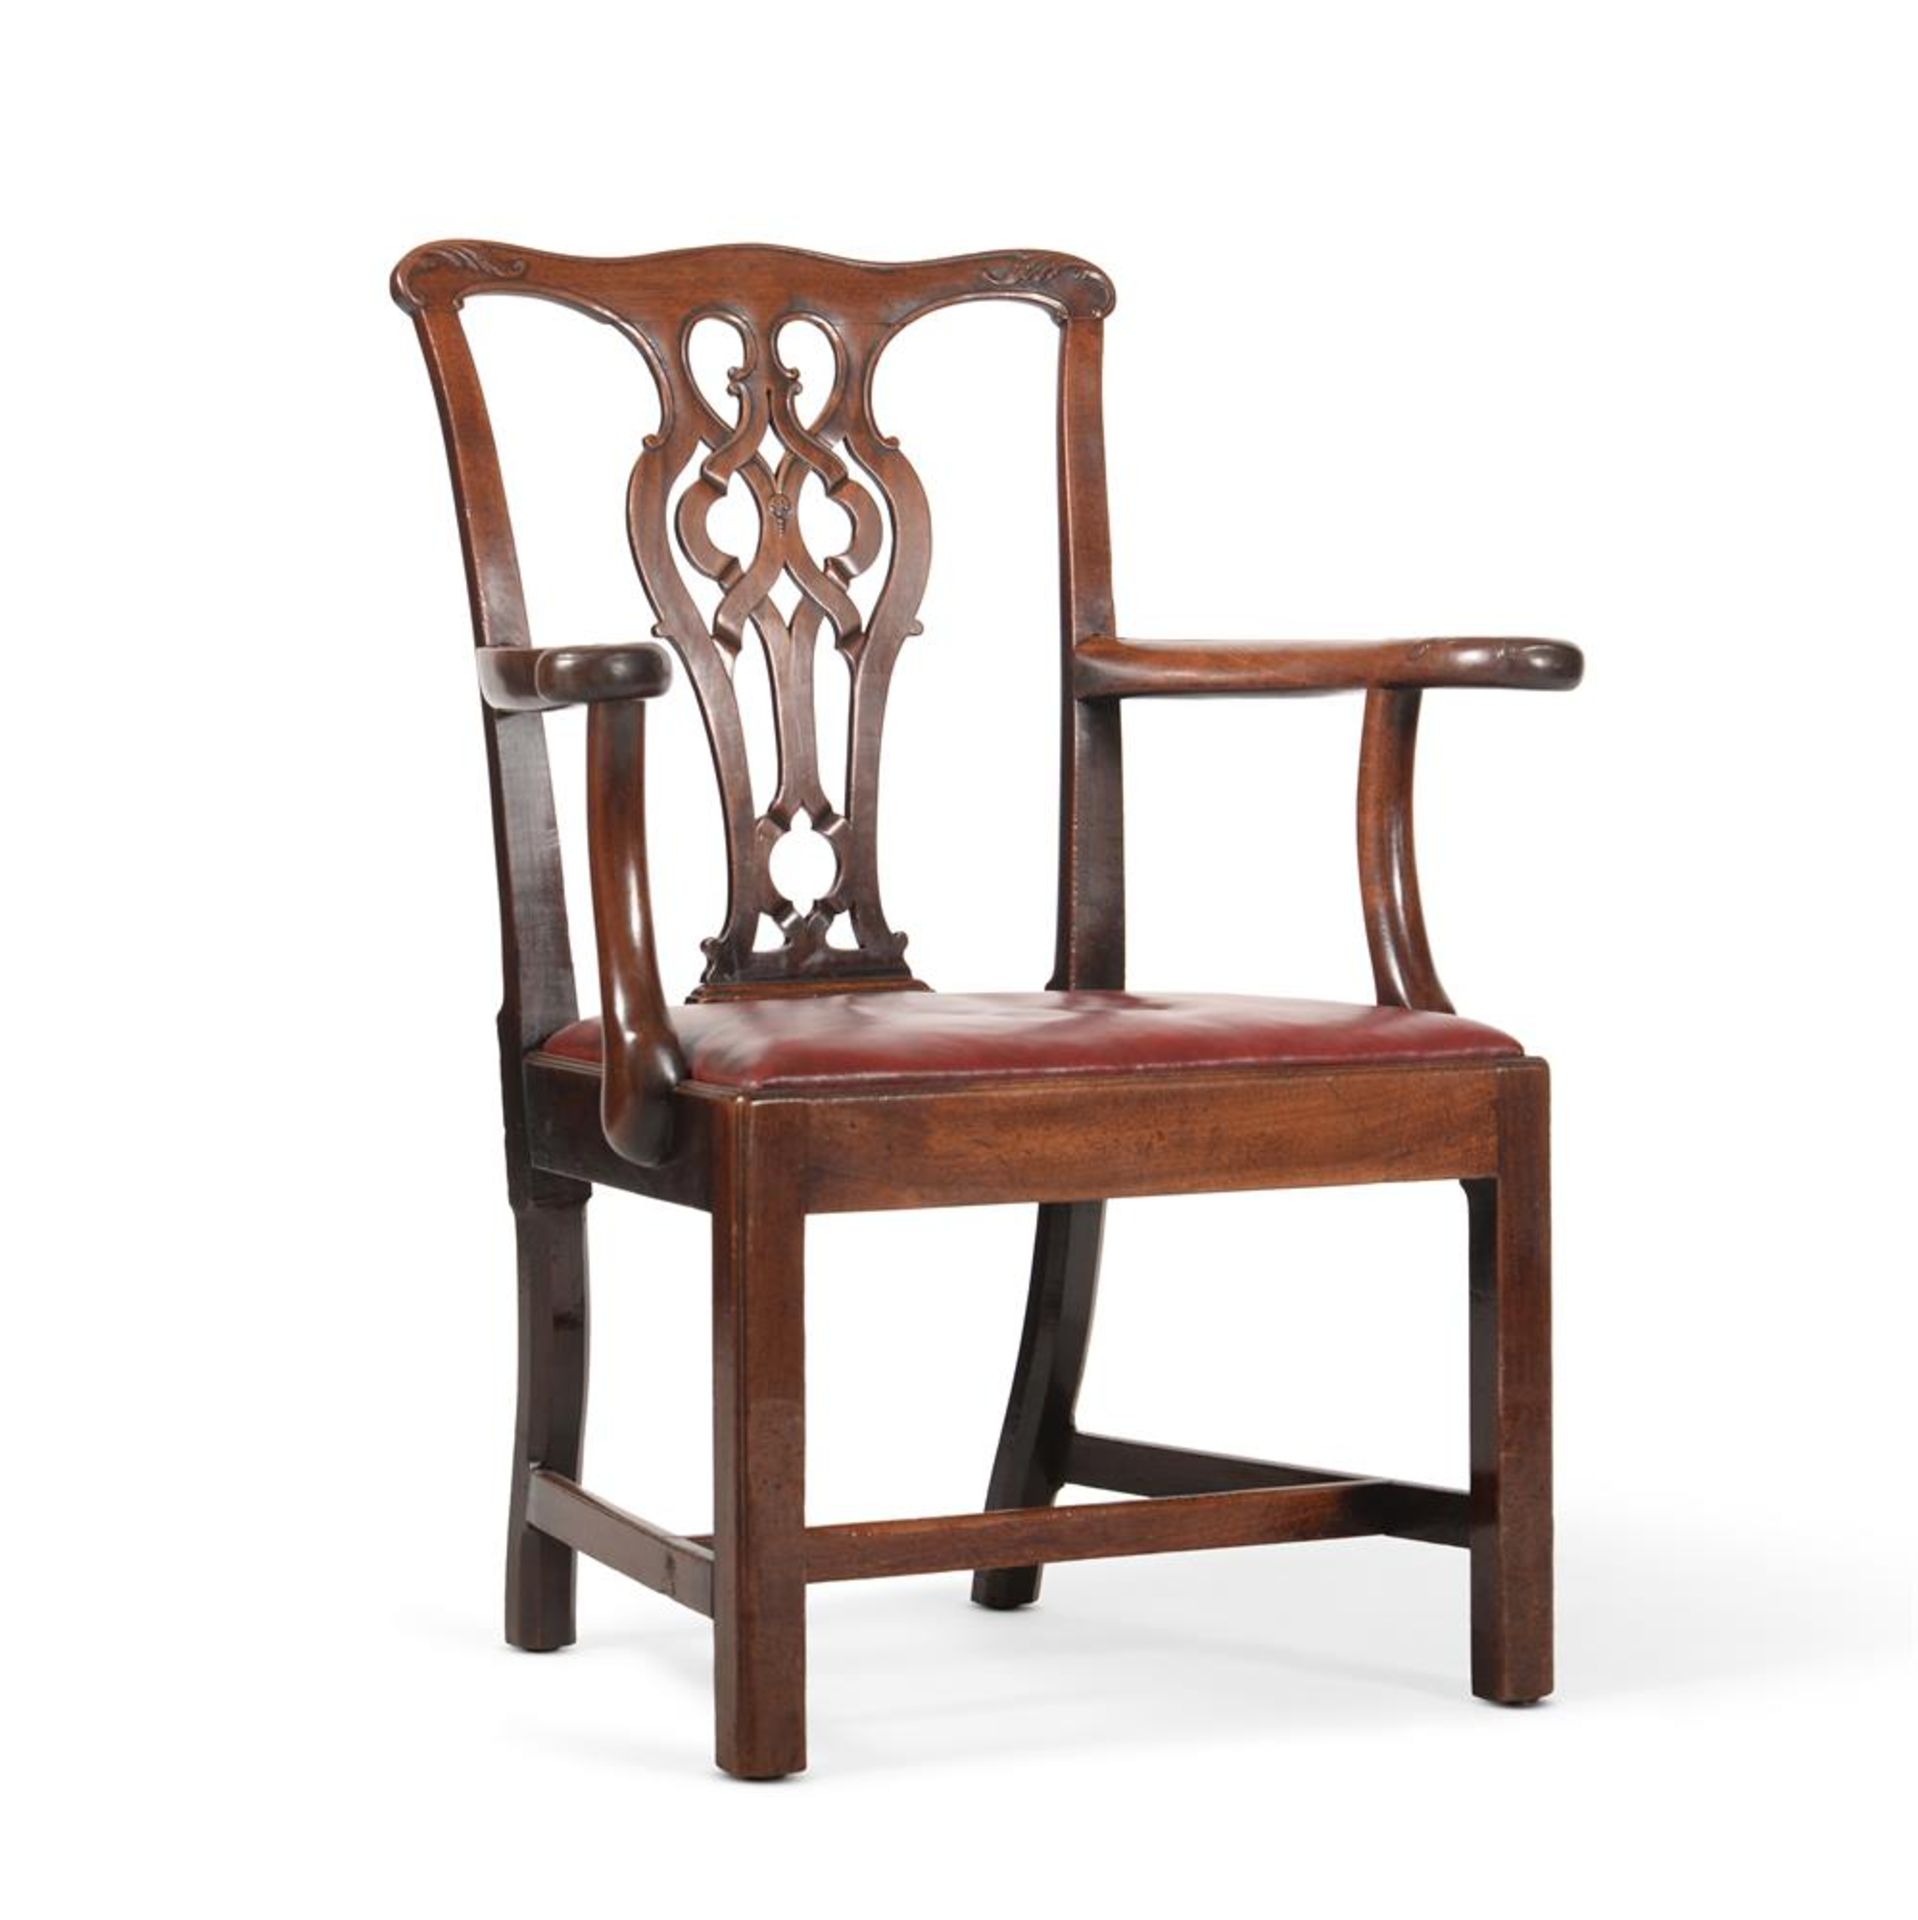 A GEORGE II MAHOGANY OPEN ARMCHAIR, IN THE MANNER OF THOMAS CHIPPENDALE, CIRCA 1765 - Image 2 of 4